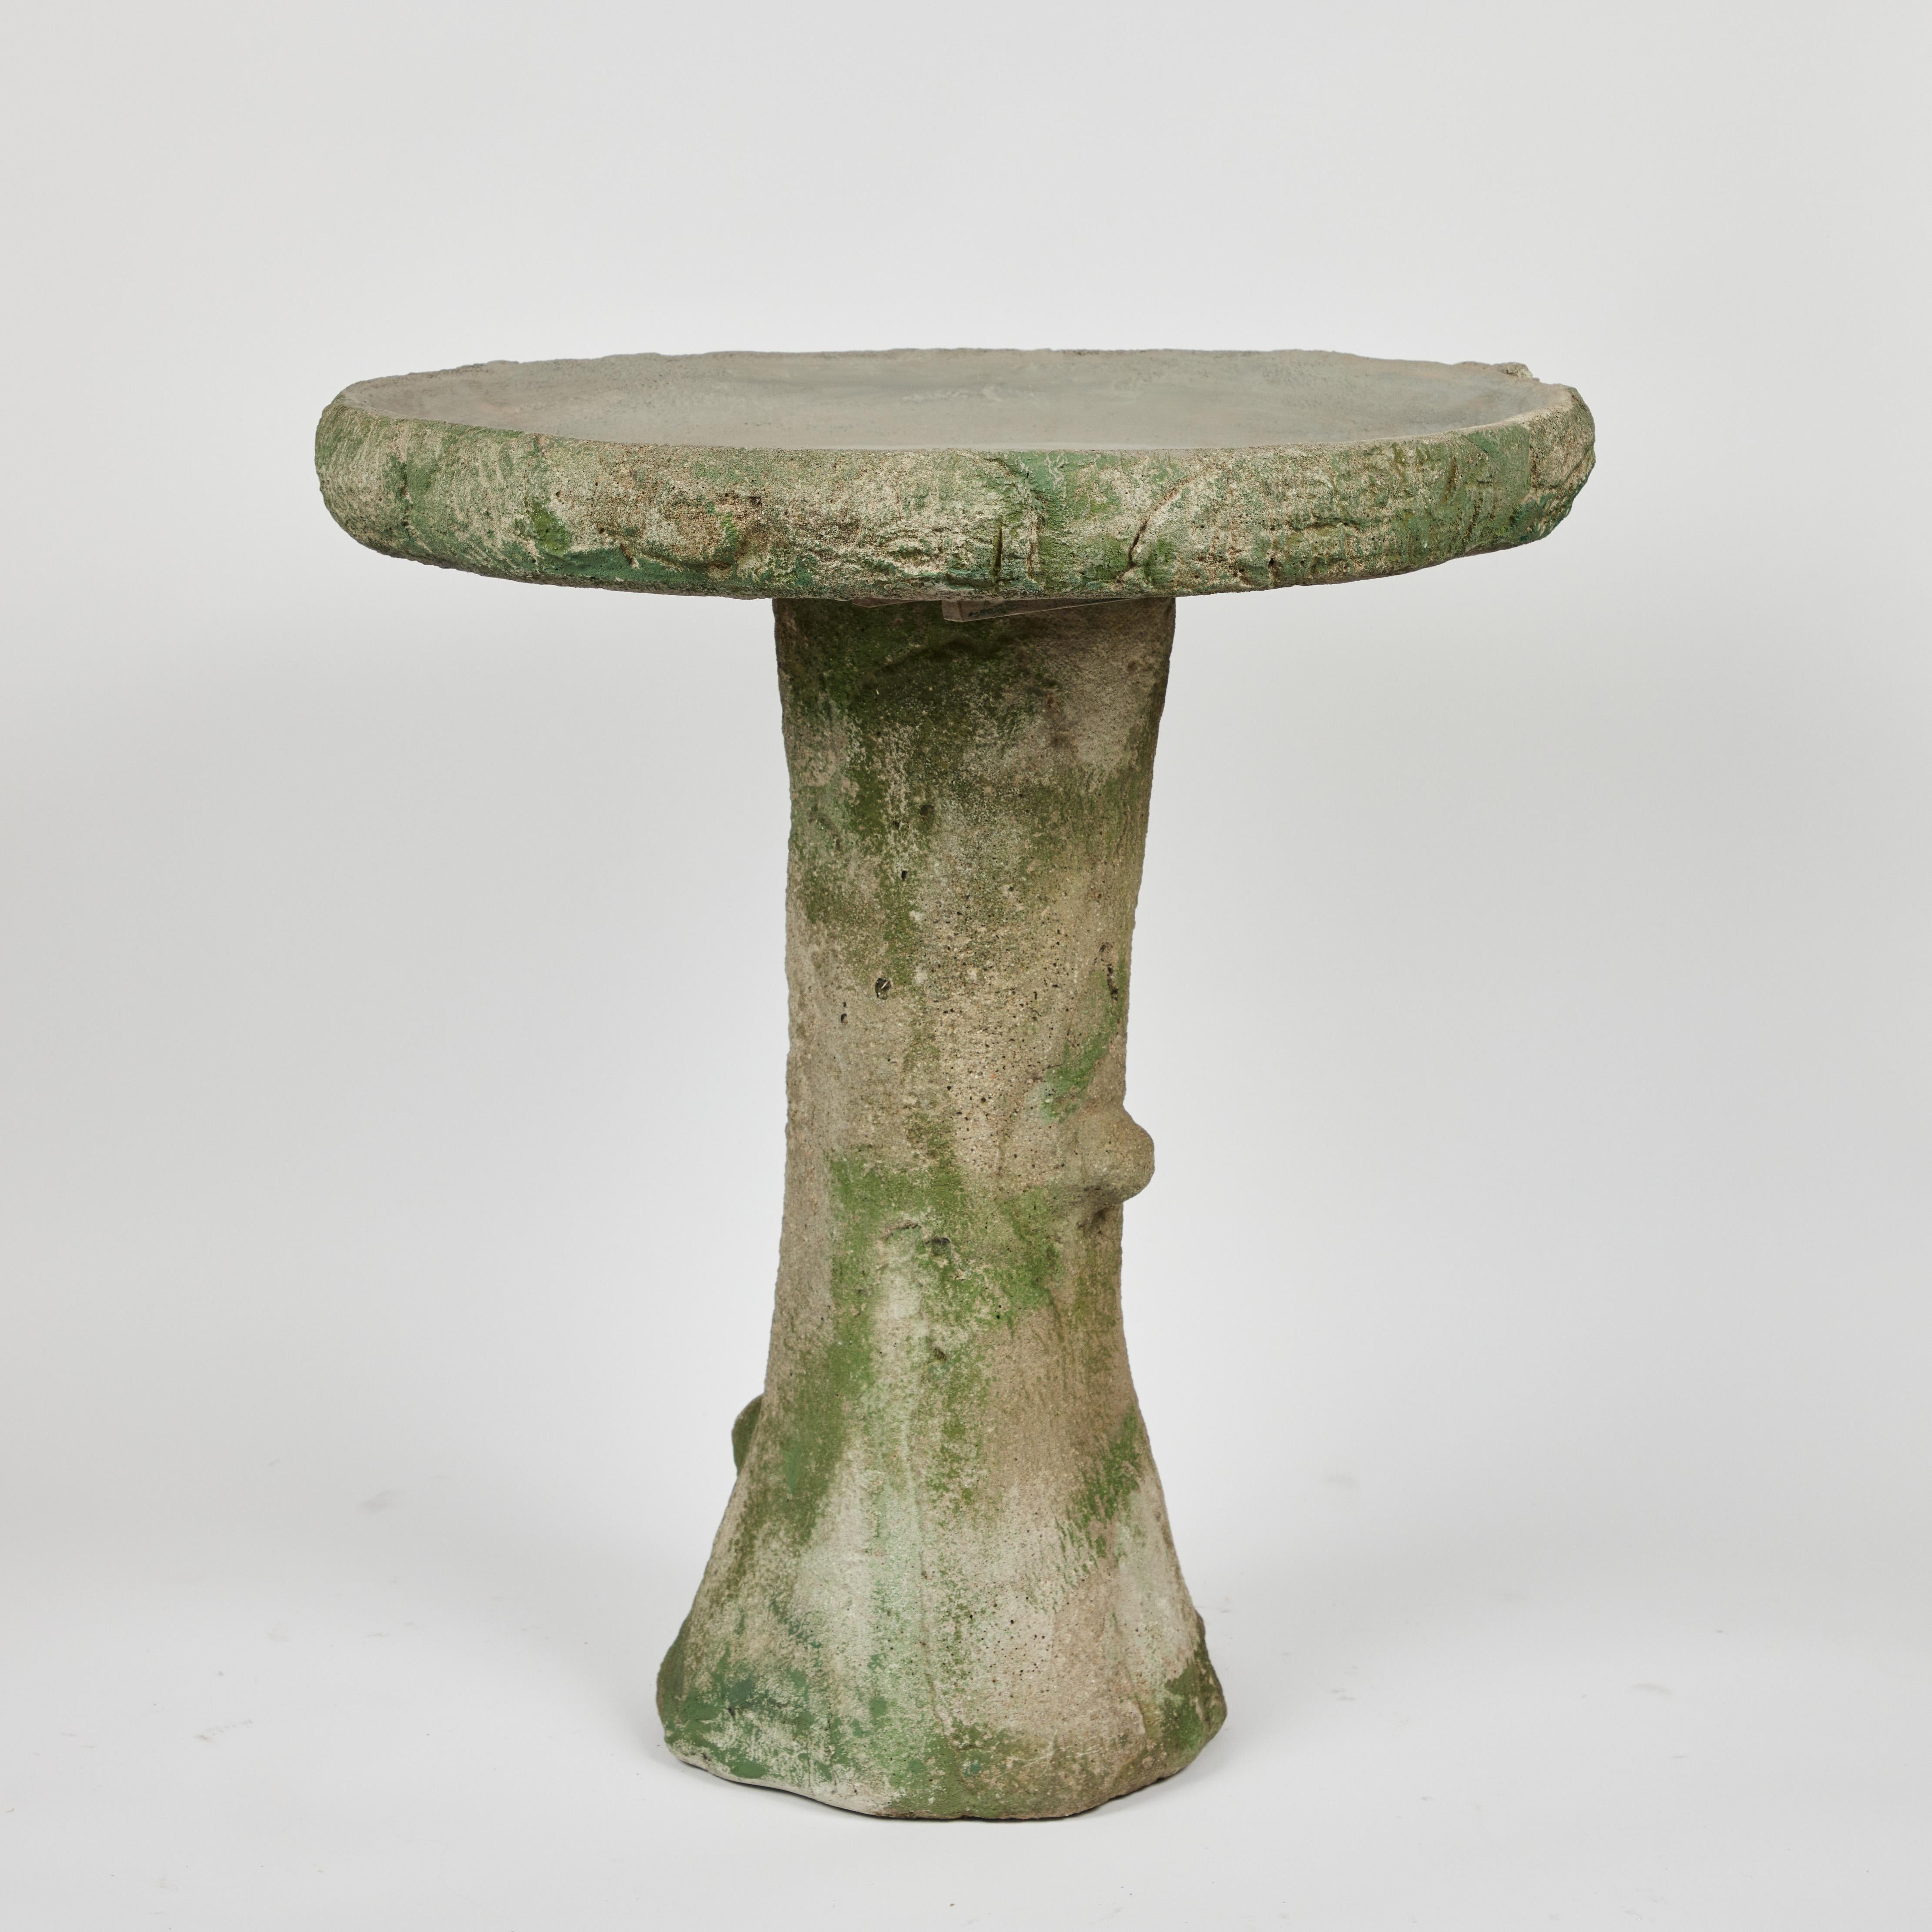 Vintage romanticized classic cast cement Faux Bois style bird bath with slight green natural verdigris patina. (2 pieces) The perfect accent to any yard or beautiful flower garden.

Measures: 24